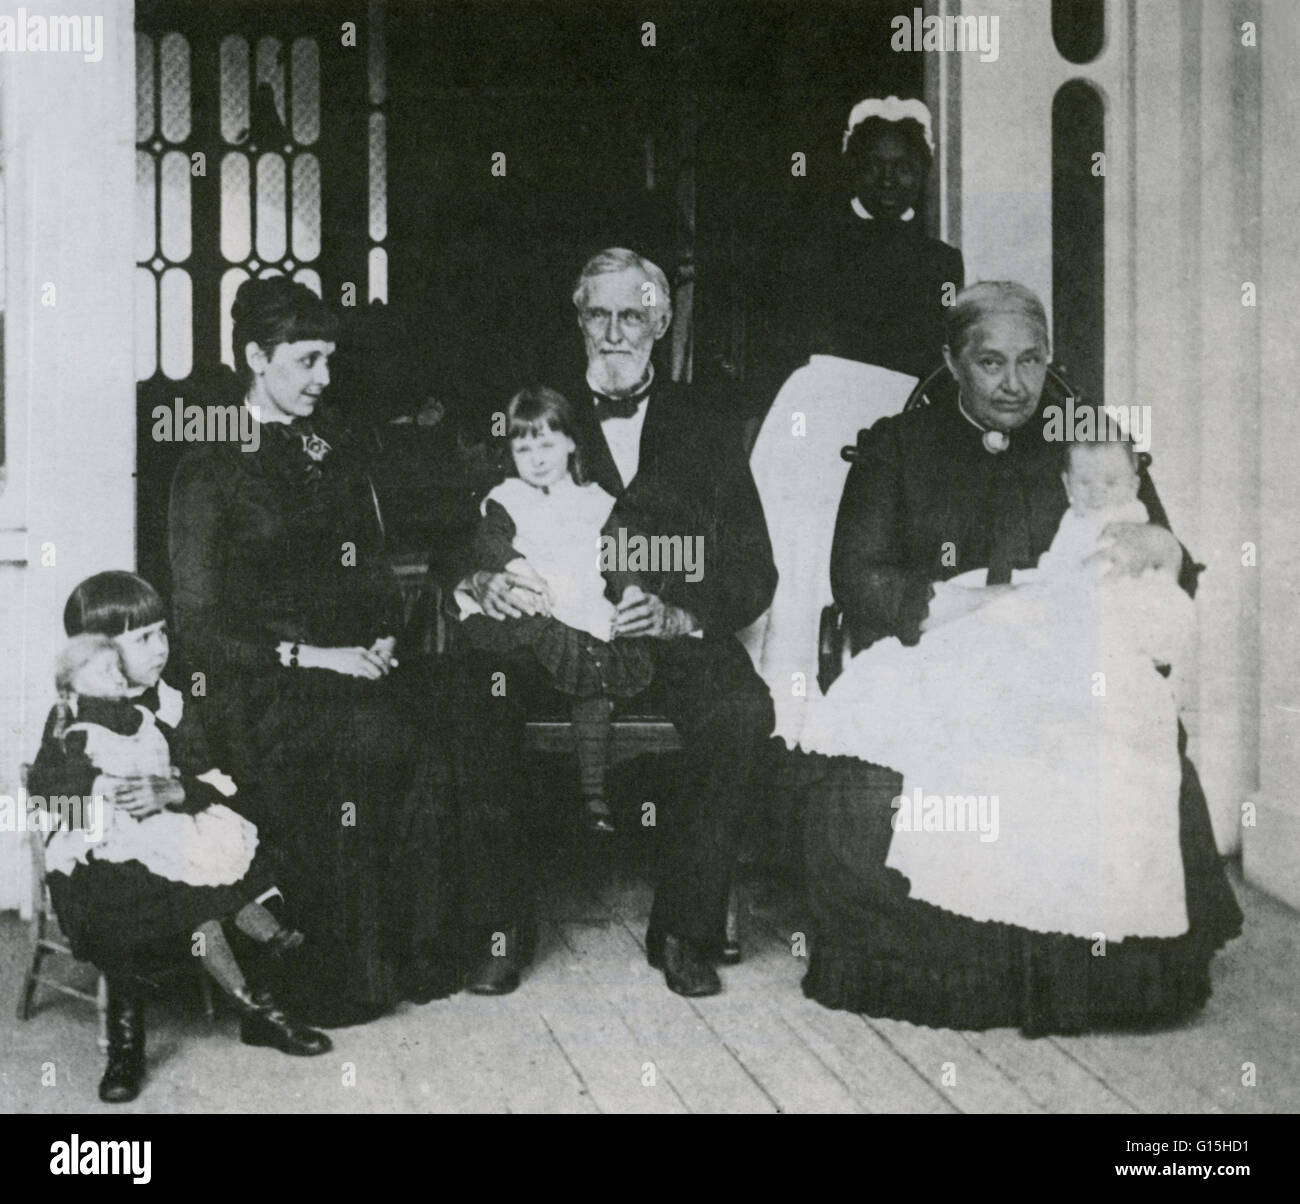 Davis with his wife, Varina, daughter Maggie Hayes and her three children circa 1885. Jefferson Finis 'Jeff' Davis (1808-1889) was an American statesman and leader of the Confederacy during the American Civil War, serving as President for its brief histor Stock Photo